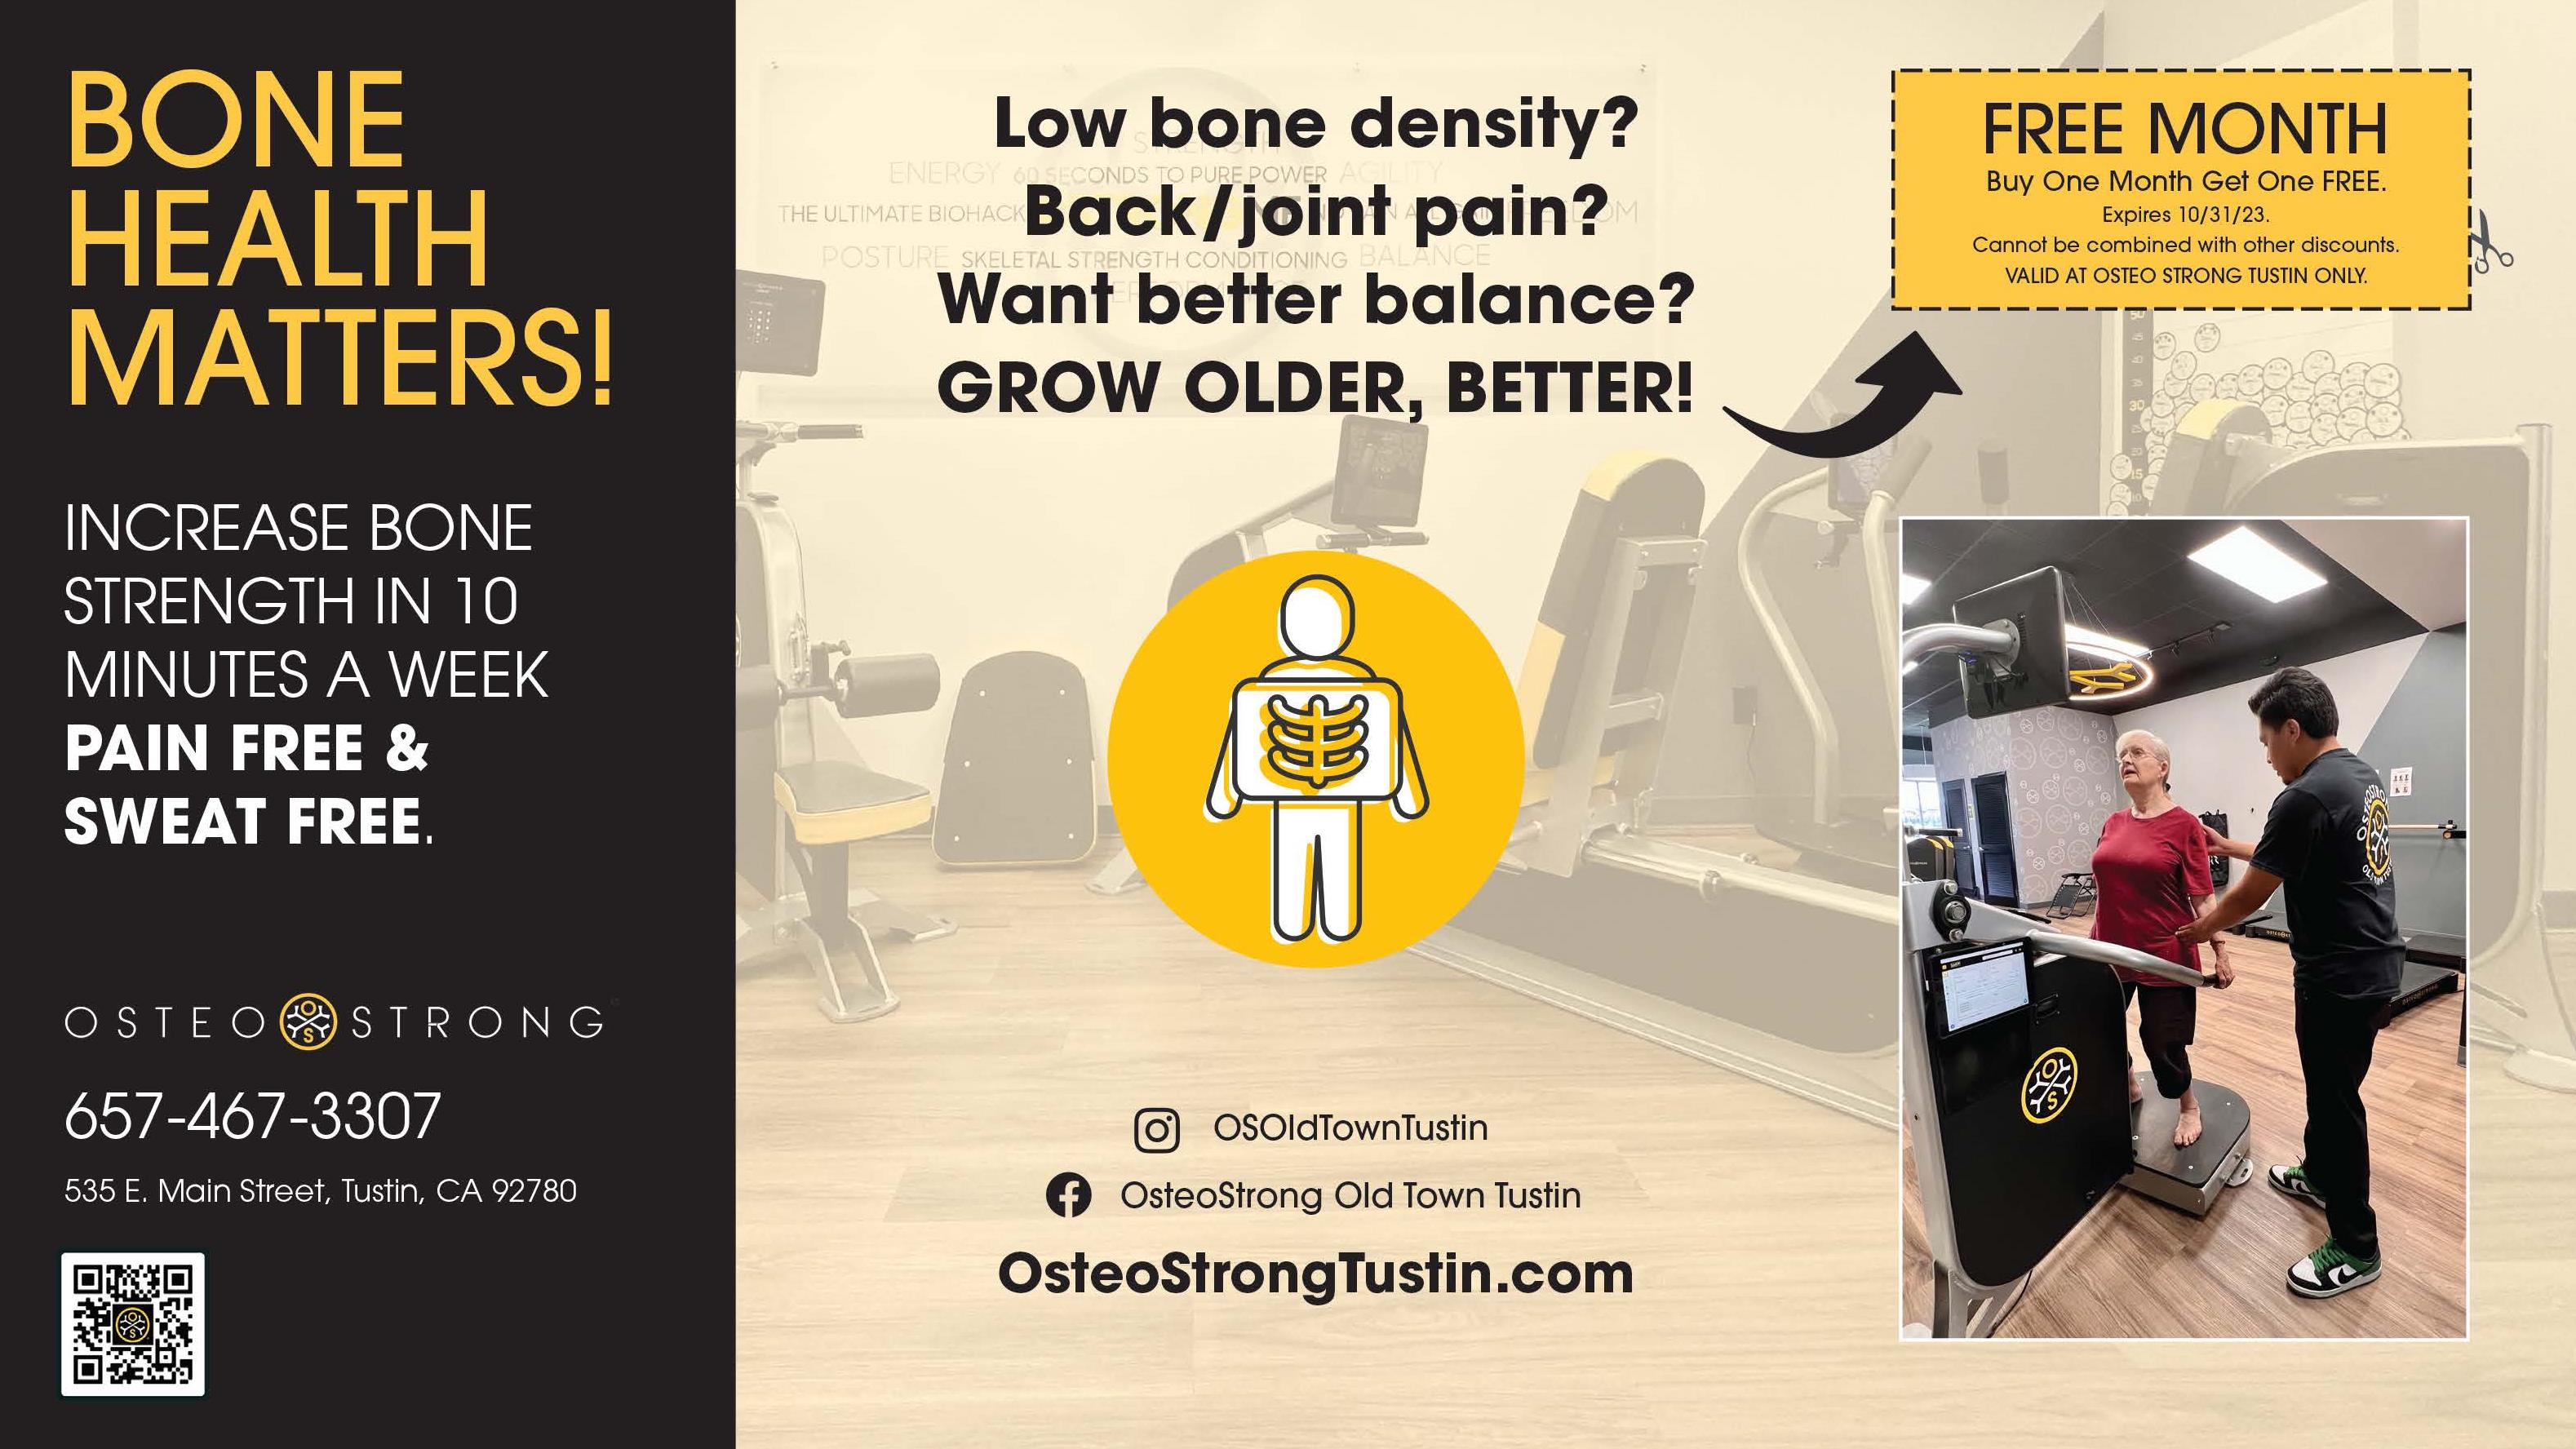 Osteostrong/Fitness Centers                                                                                                                                                                                         